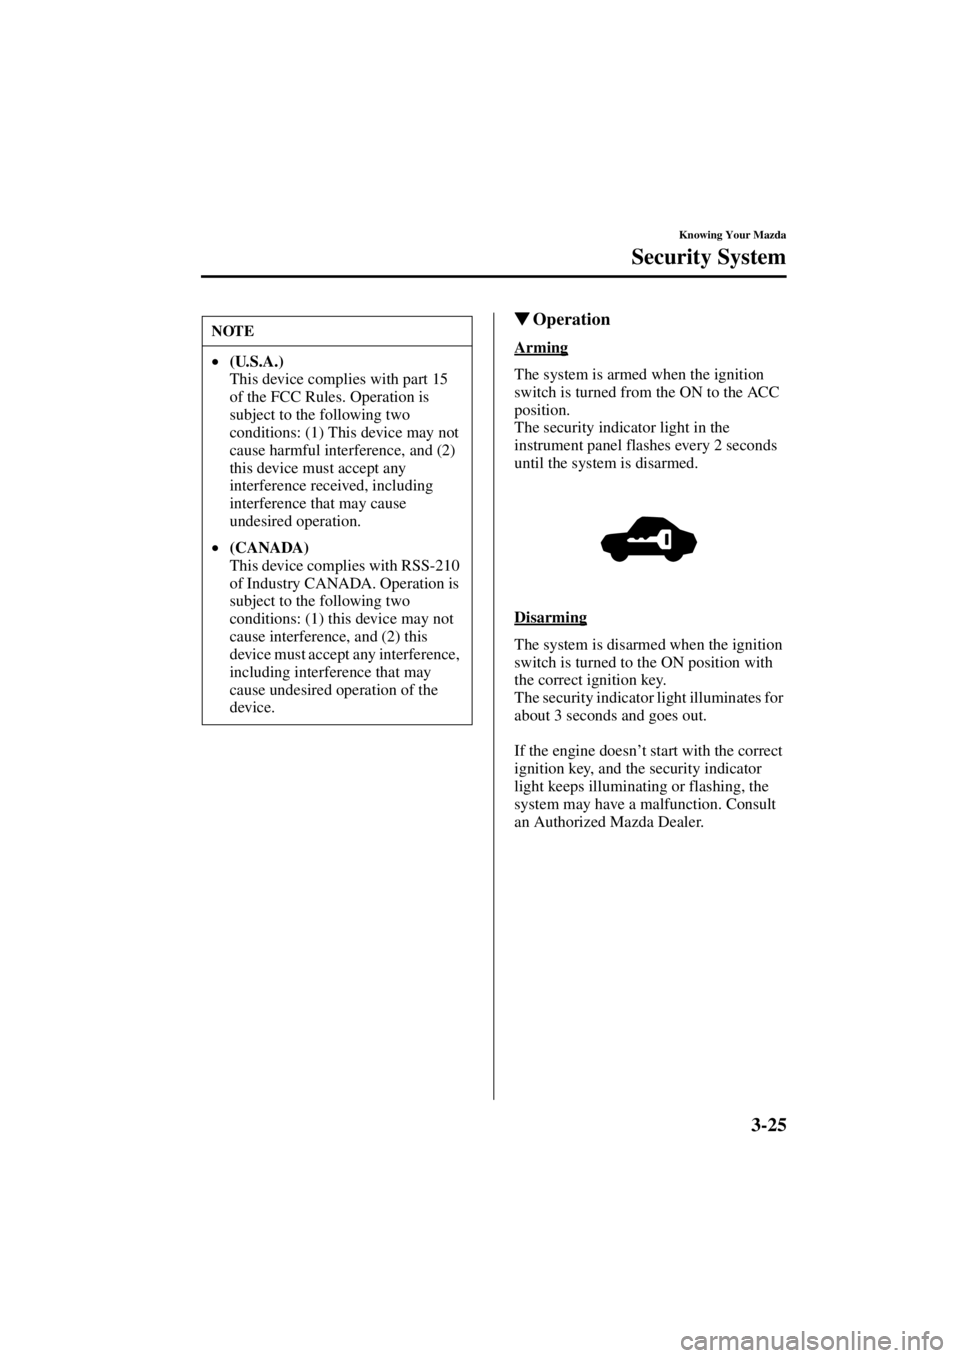 MAZDA MODEL 3 5-DOOR 2004  Owners Manual 3-25
Knowing Your Mazda
Security System
Form No. 8S18-EA-03I
Operation
Arming
The system is armed when the ignition 
switch is turned from the ON to the ACC 
position.
The security indicator light in